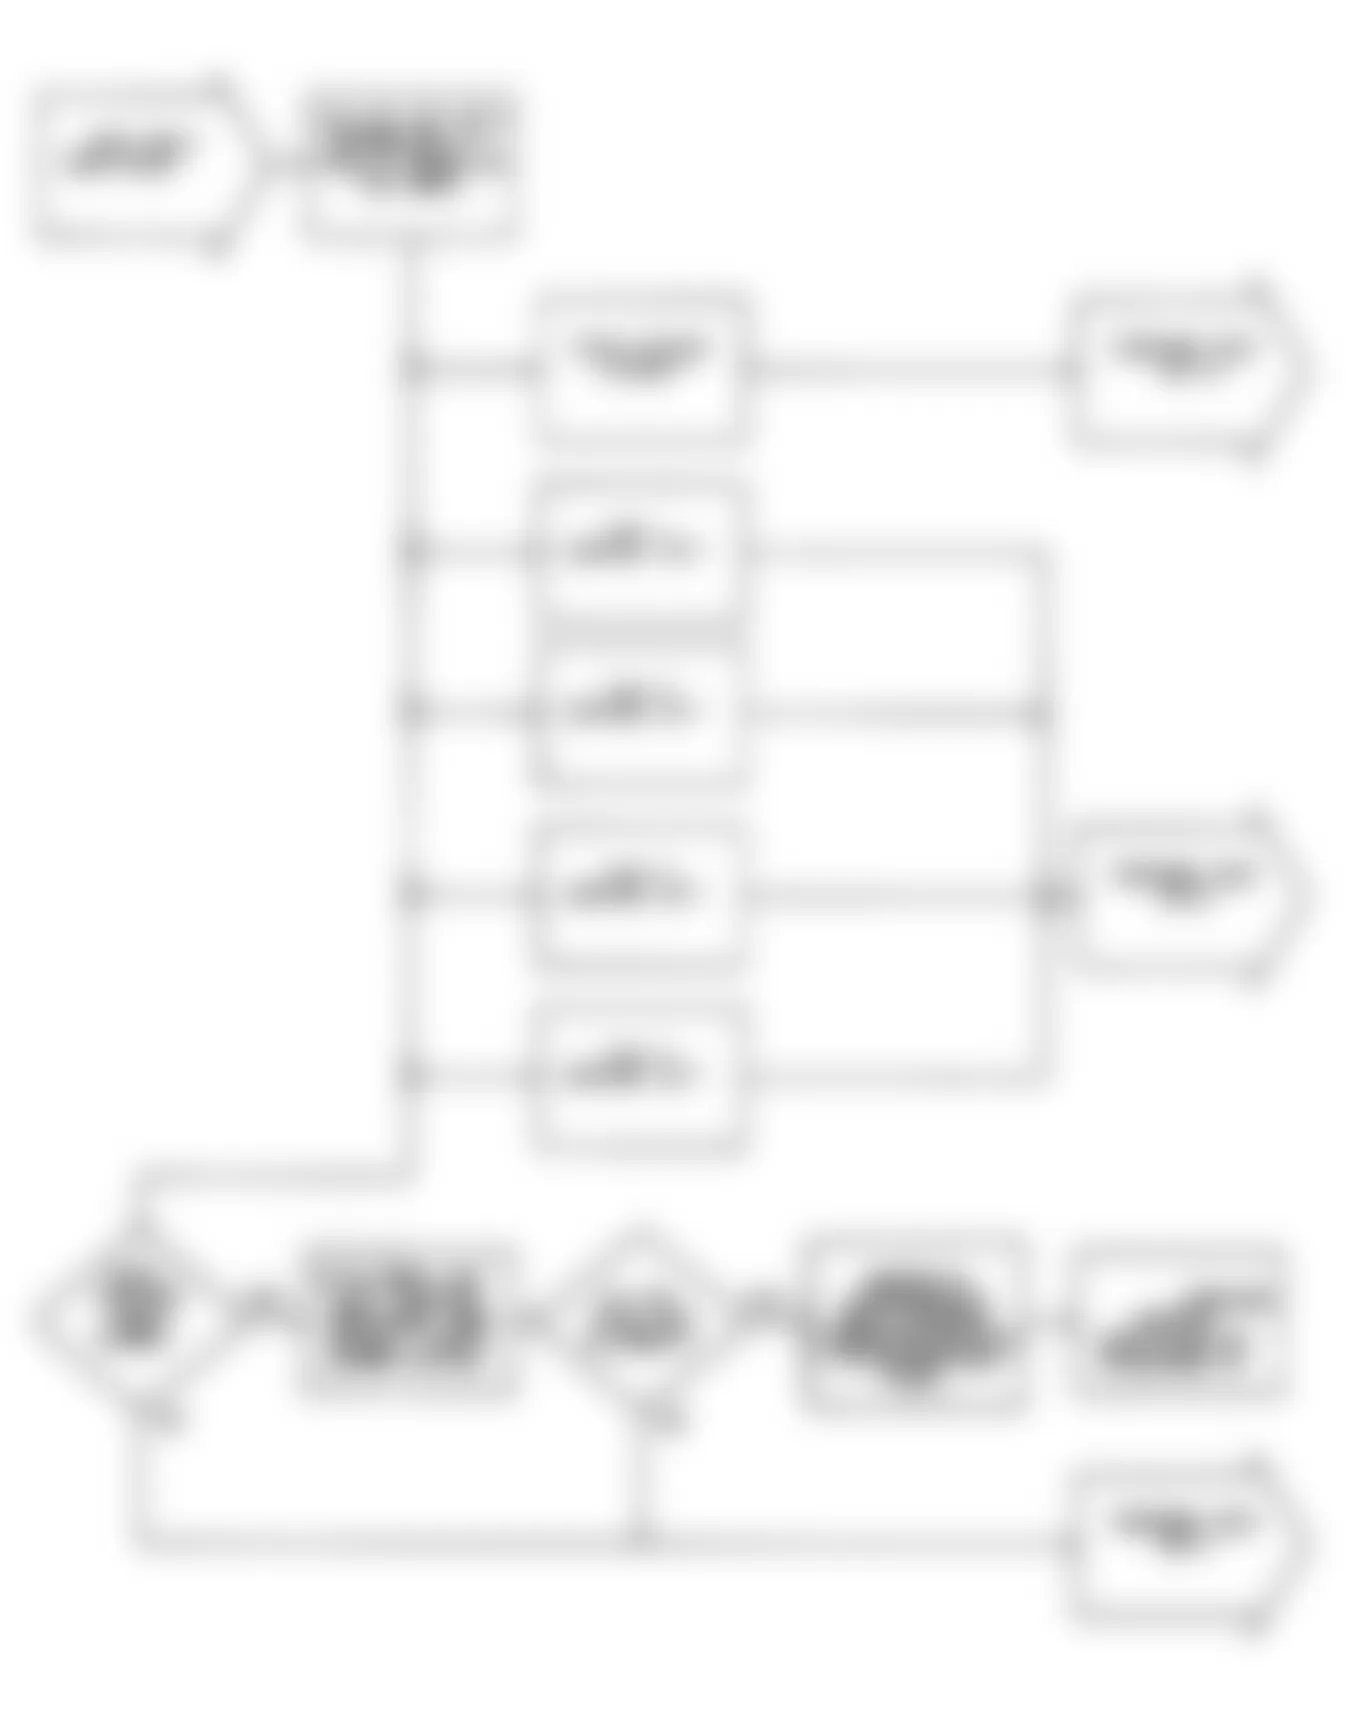 Dodge Dynasty LE 1990 - Component Locations -  NS2: Flow Chart (2 of 2)